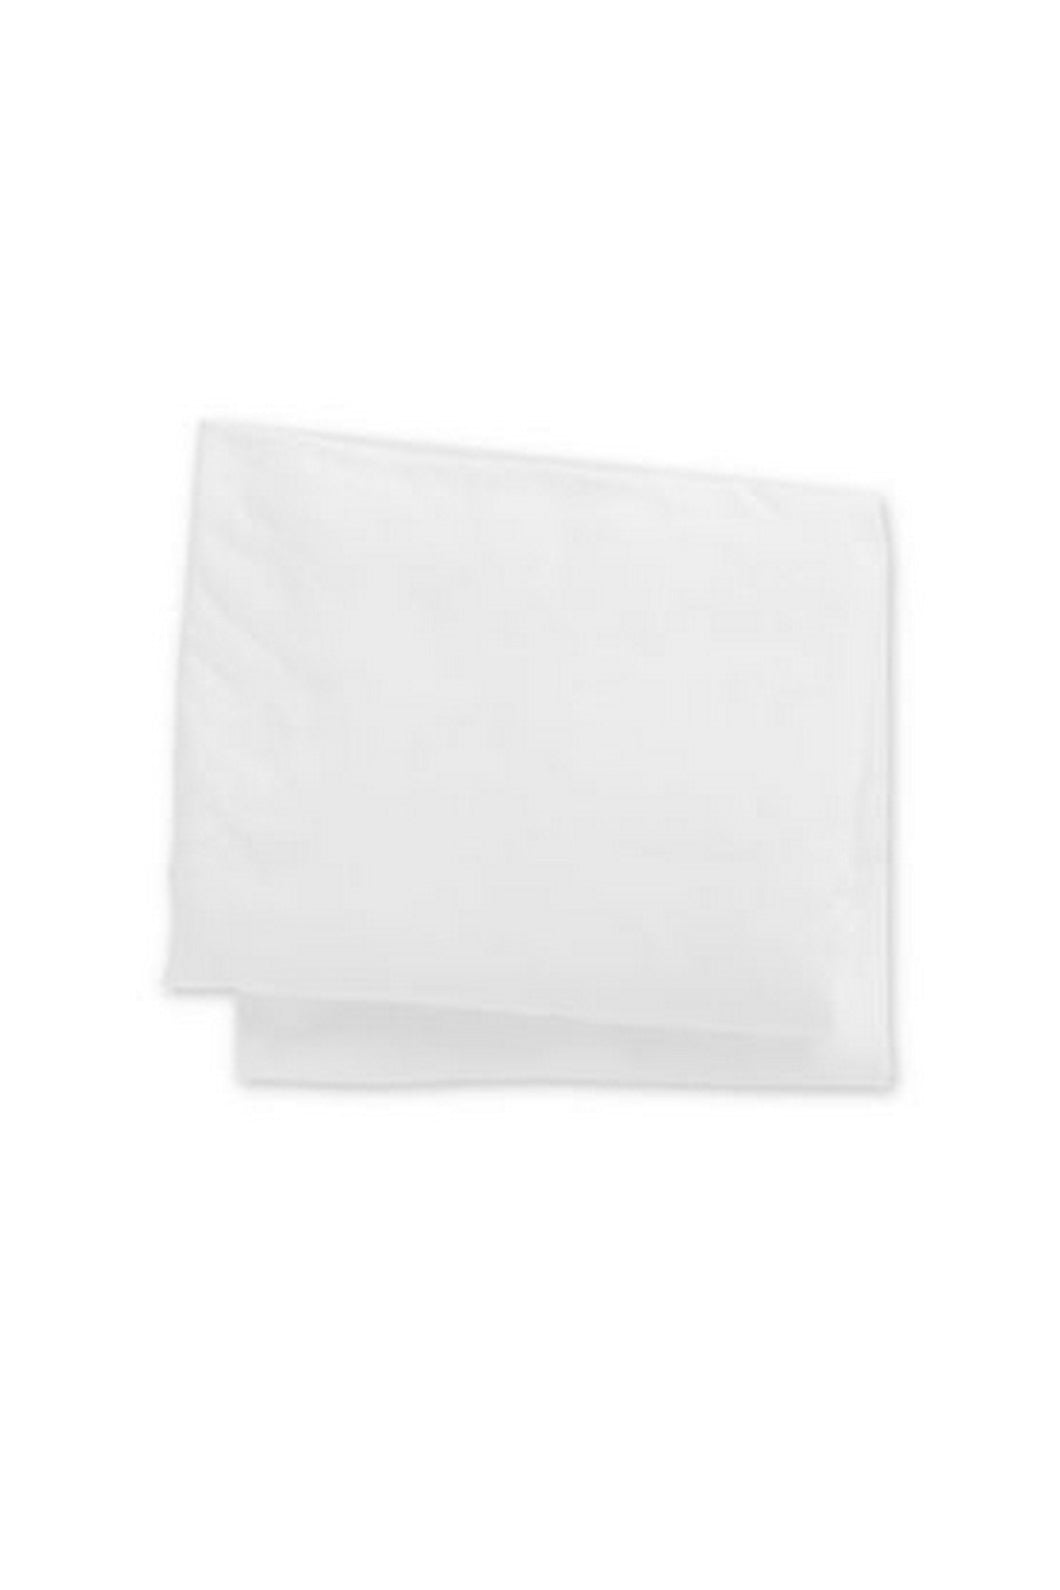 Mothercare Jersey Fitted Cot Bed Sheets 2 Pack White 1